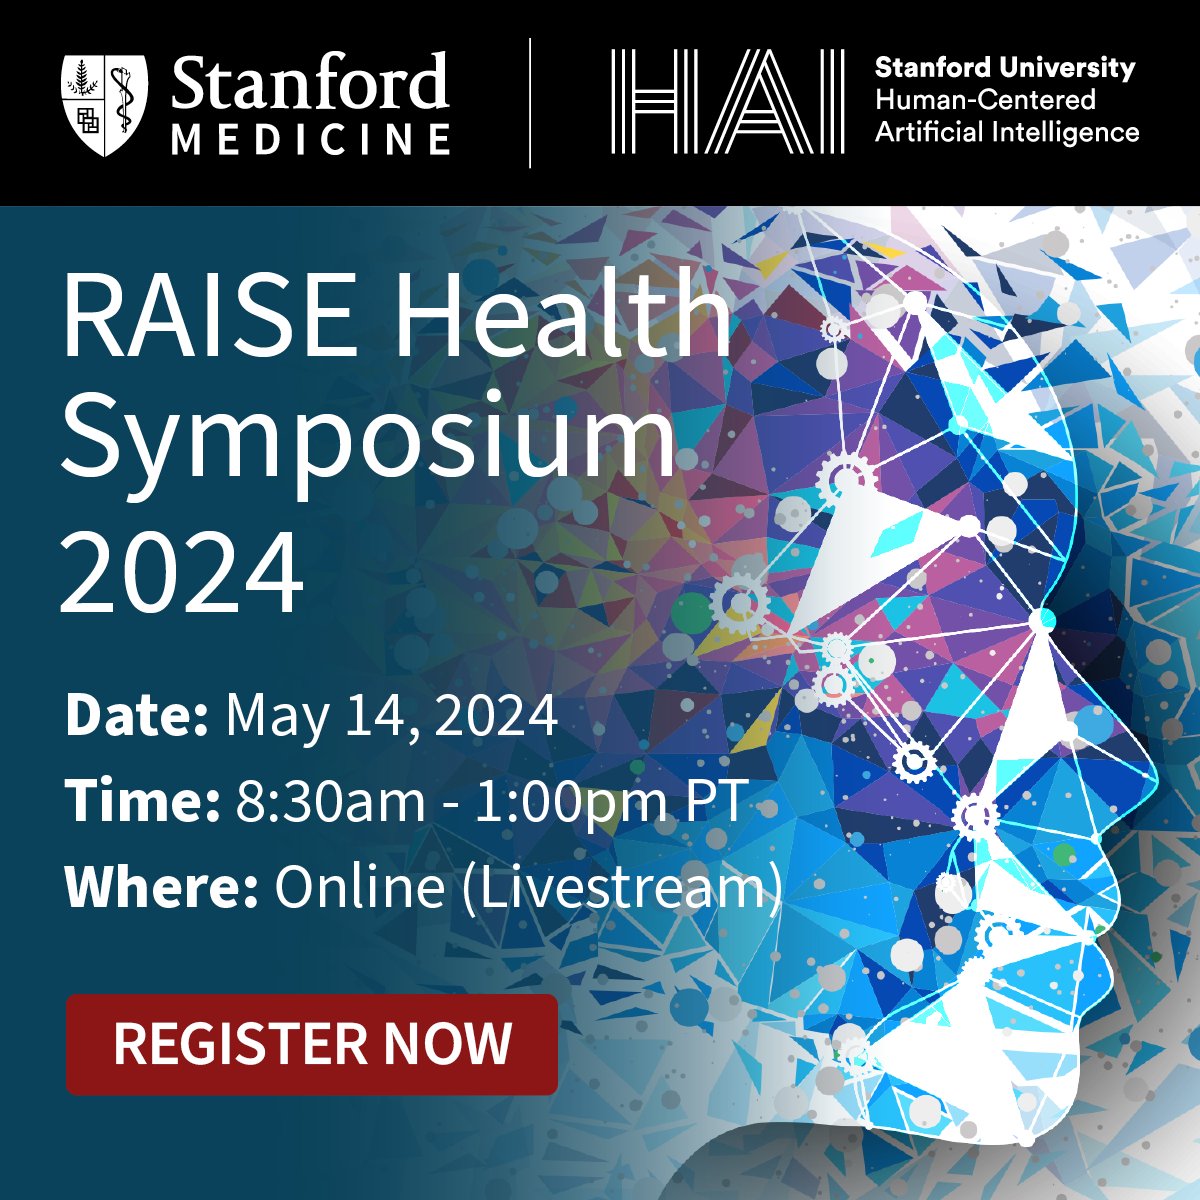 Register for Stanford’s RAISE Health Symposium on May 14th. Be part of the conversation shaping responsible AI in health and medicine. stan.md/43SmaKd #AI #AIinHealthcare #FutureofHealthcare